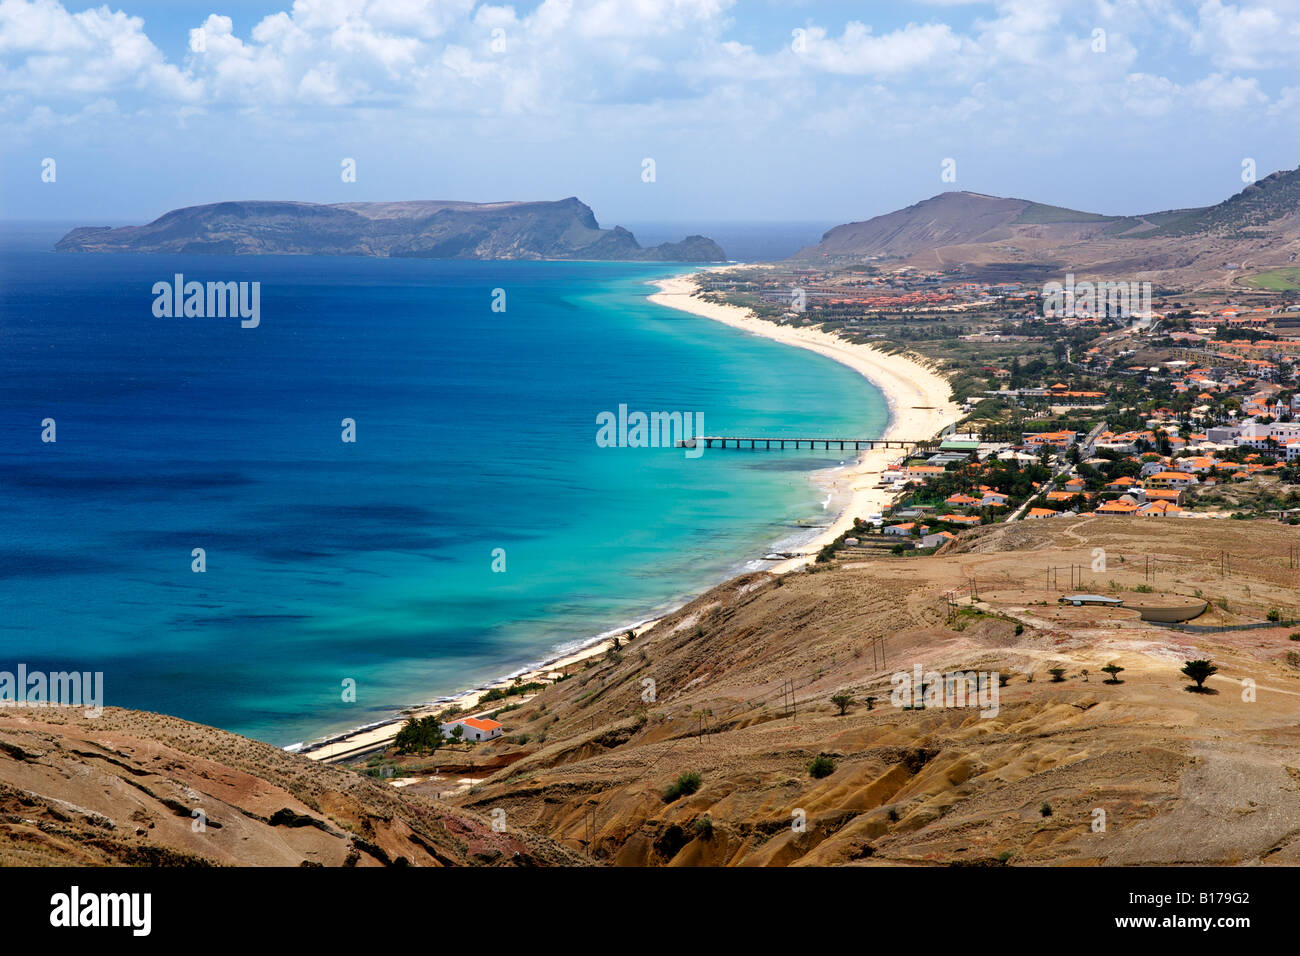 View of the beach and town of Vila Baleira seen from the Portela lookout point on the Portuguese Atlantic island of Porto Santo. Stock Photo